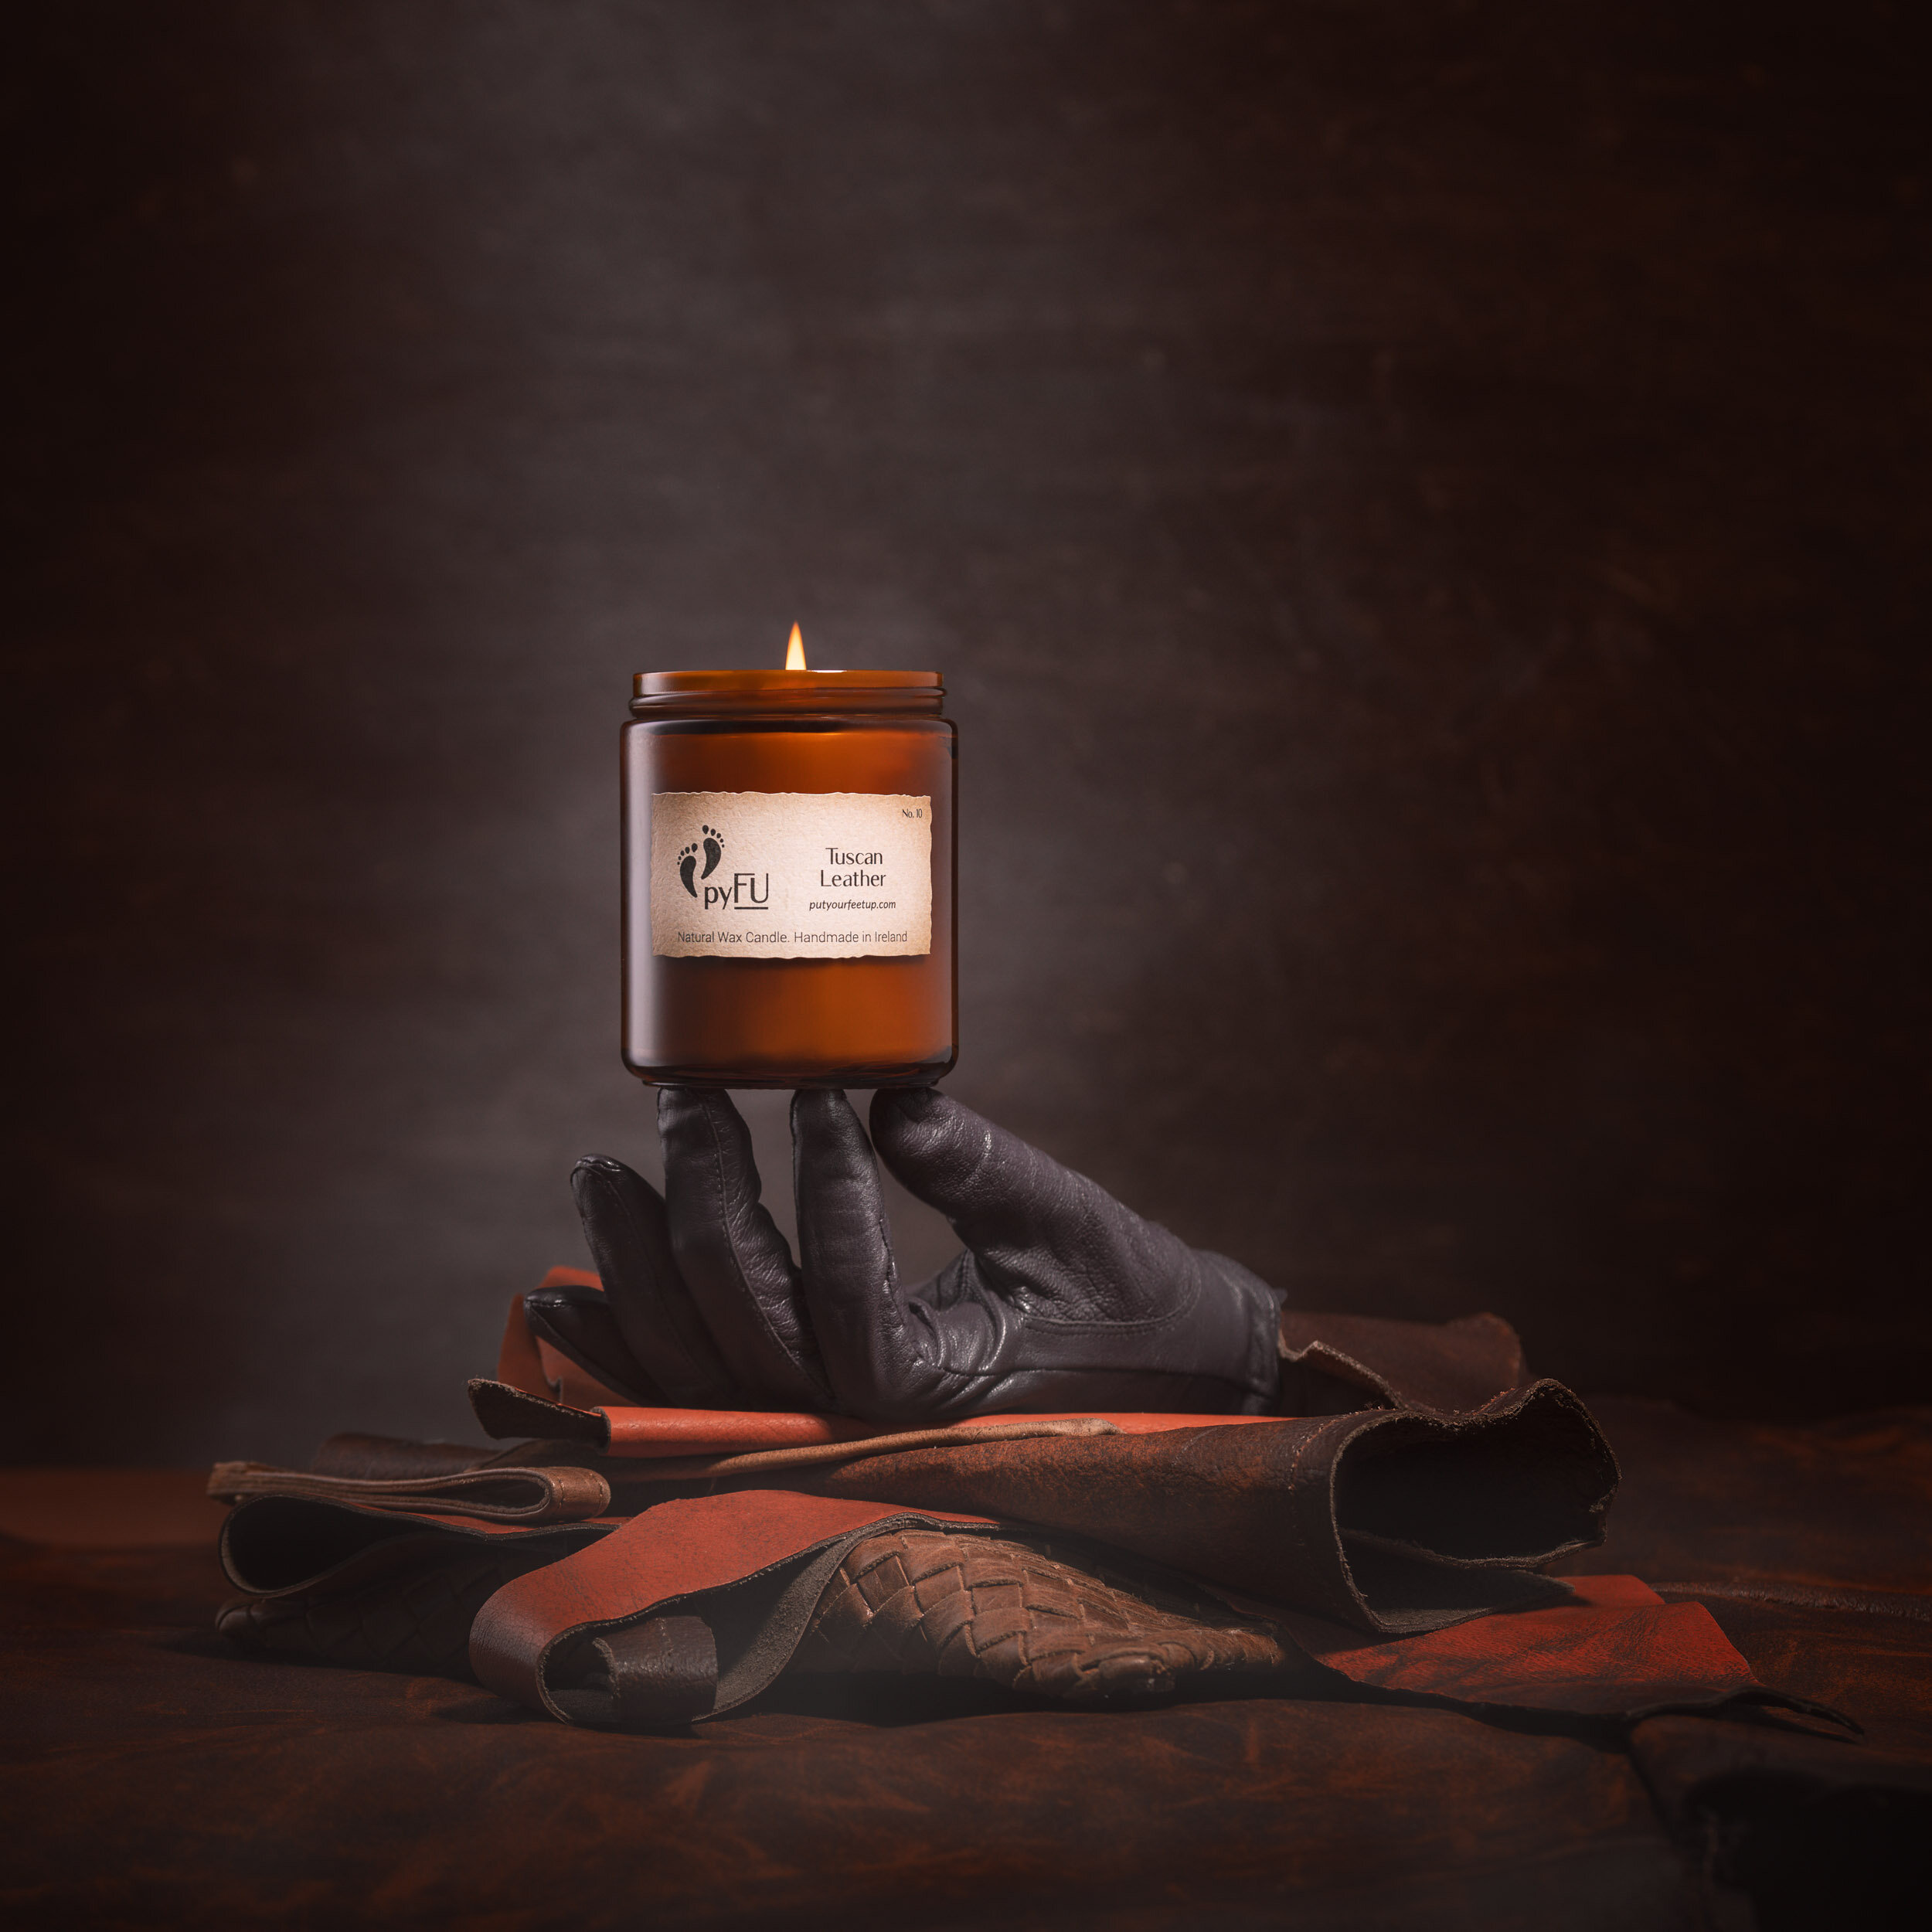 pyFu Tuscan Leather Candle | Commercial Product Shot 